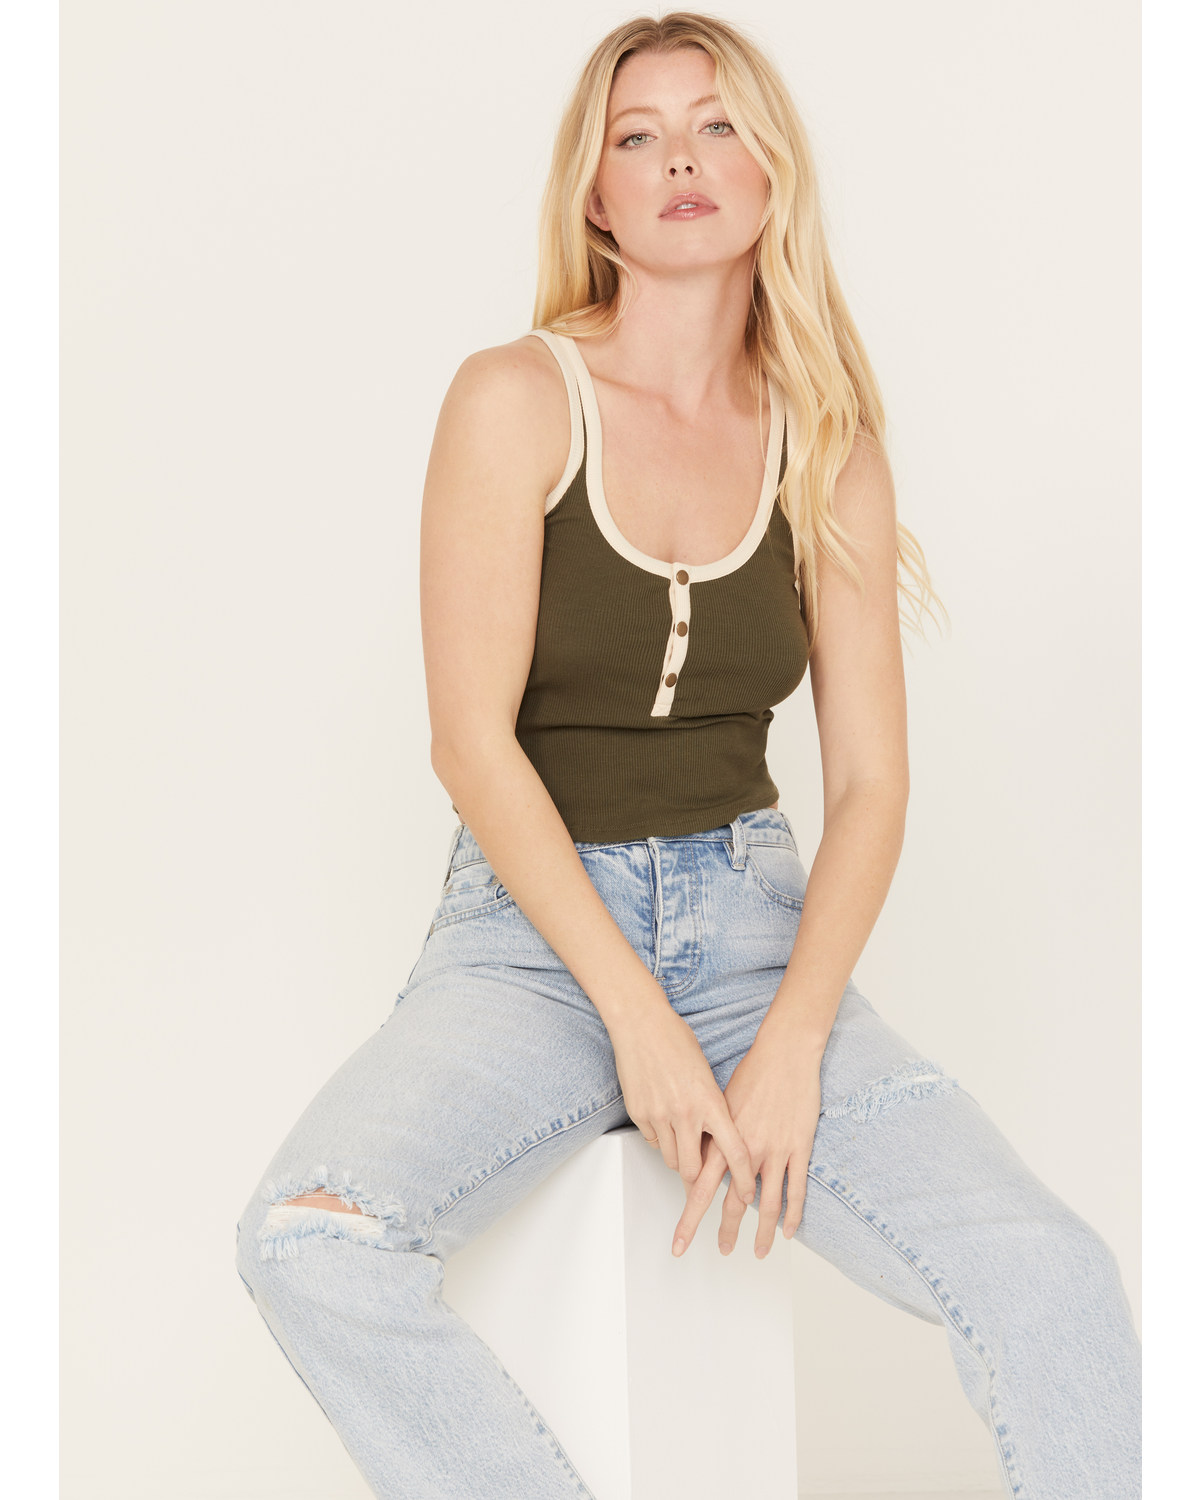 Cleo + Wolf Women's Cropped Ribbed Tank Top